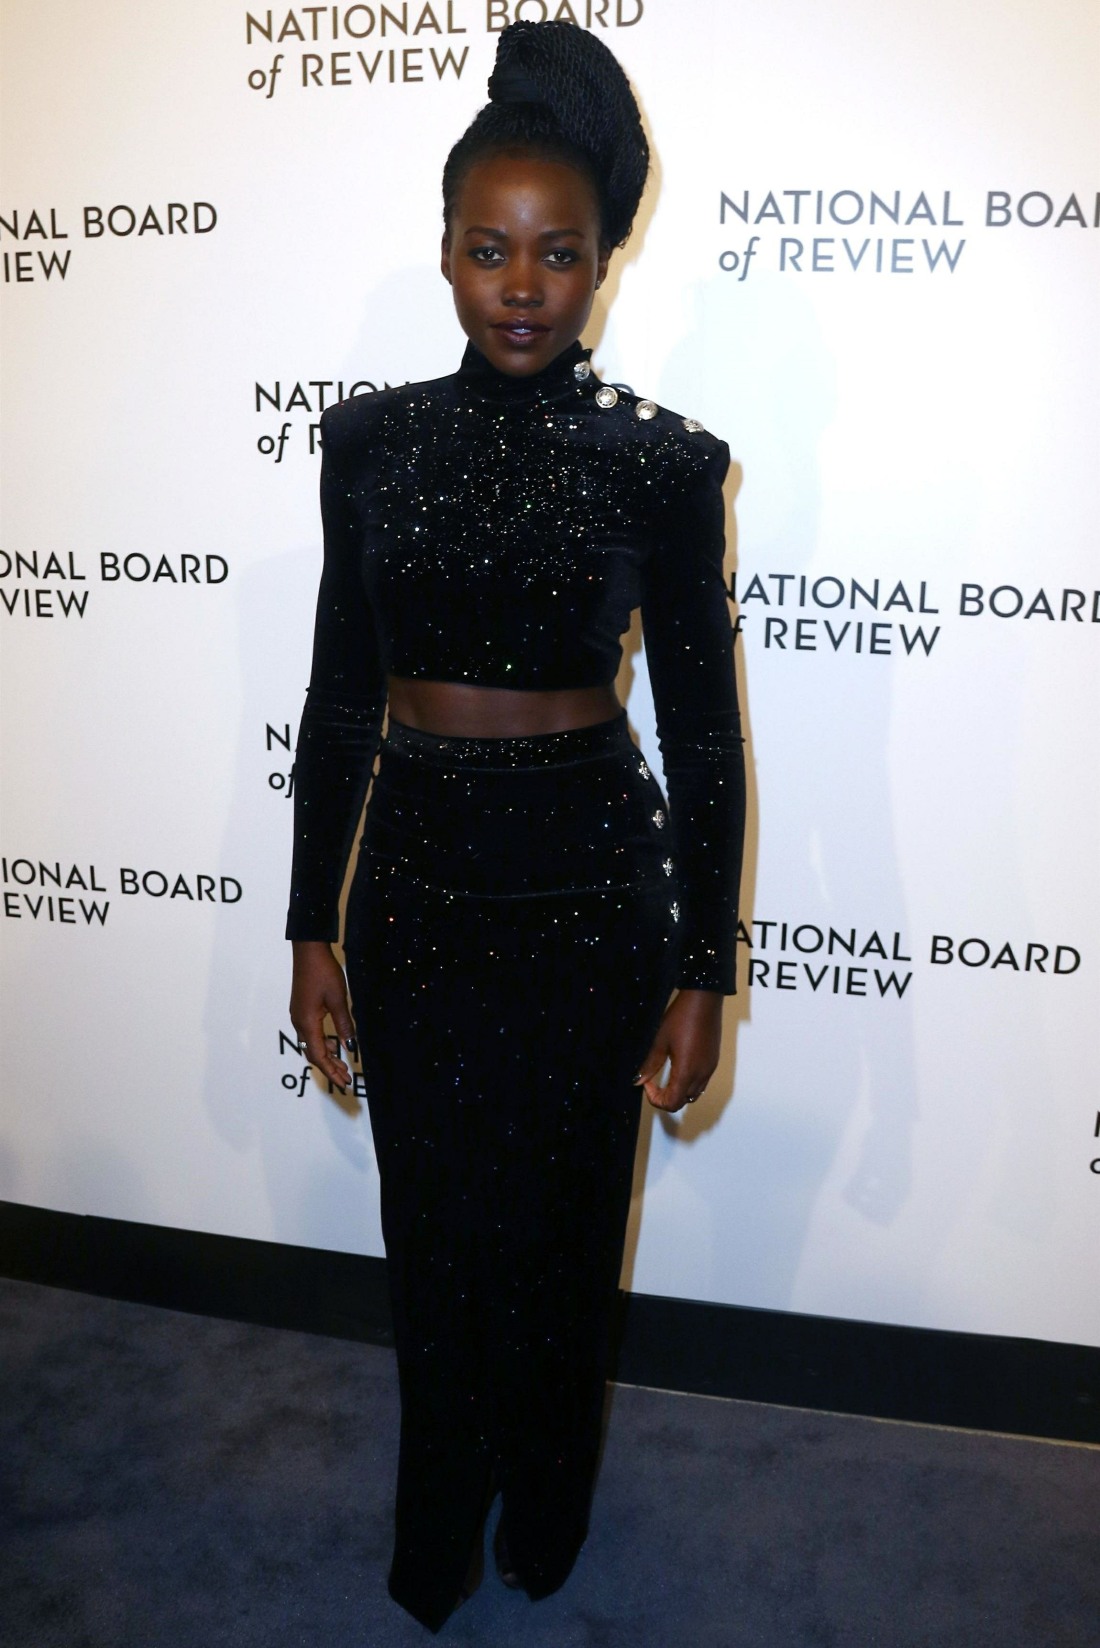 The National Board of Review Awards Gala